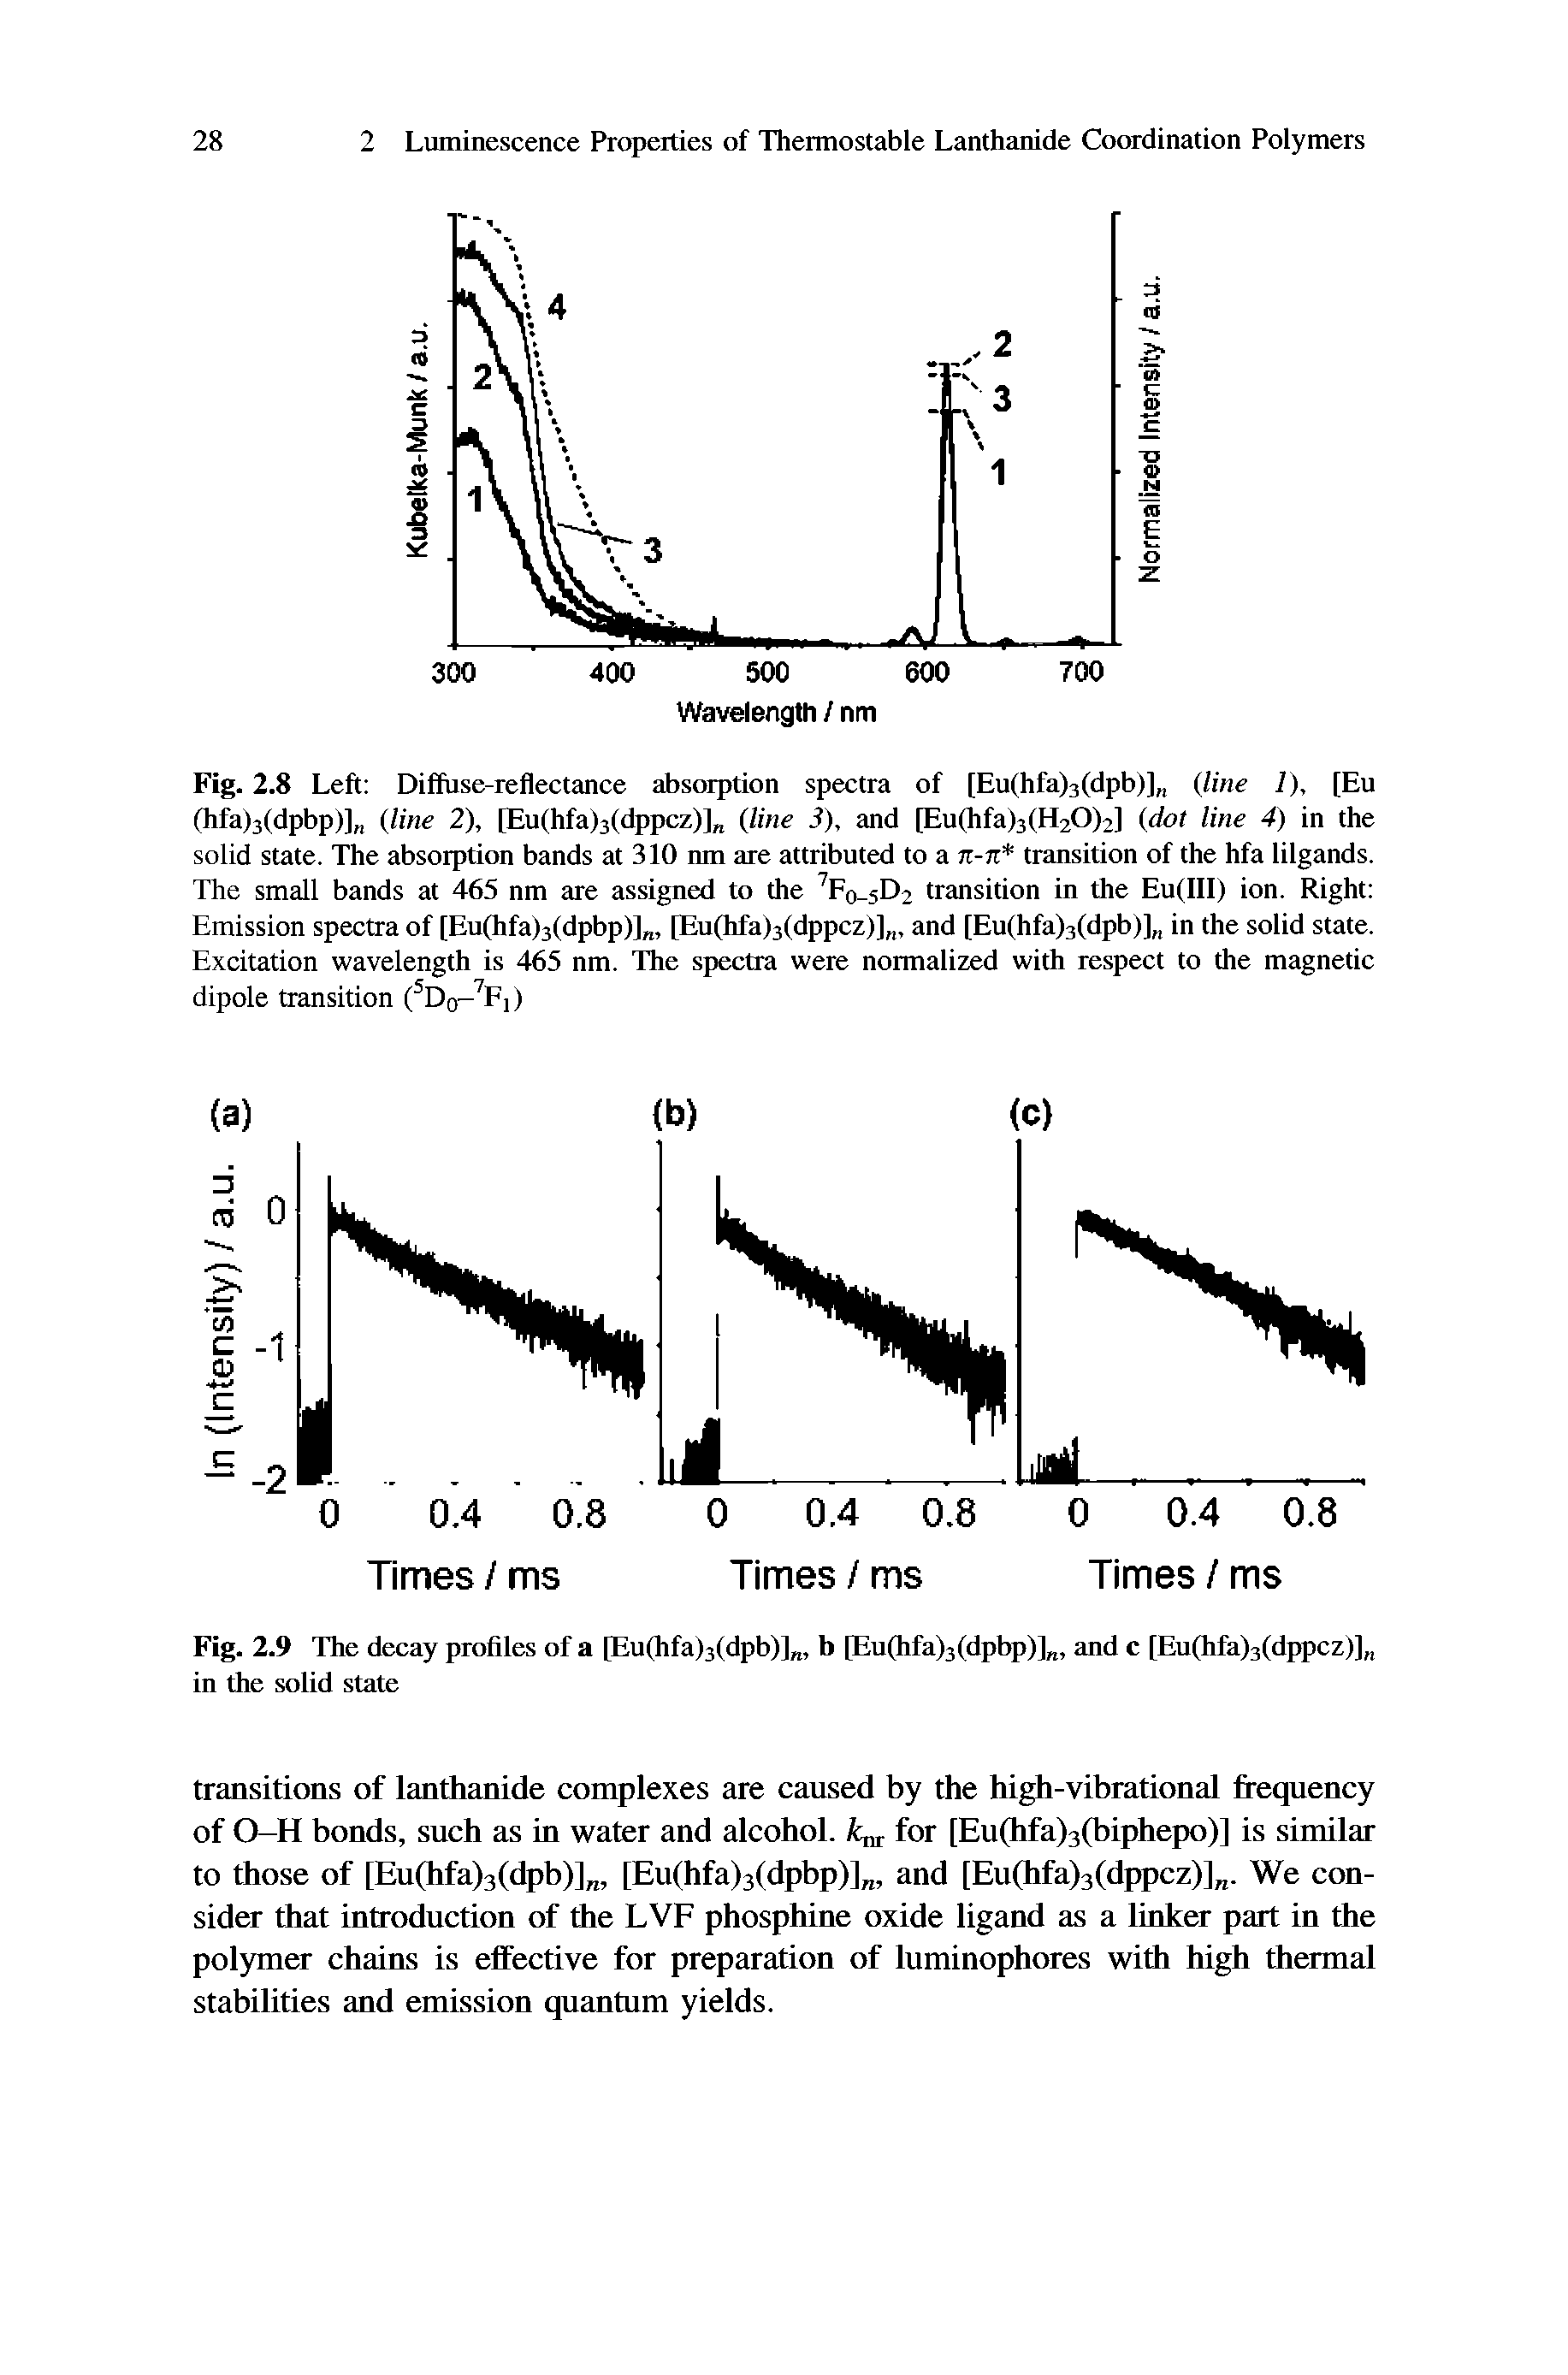 Fig. 2.8 Left Diffiise-reflectance absorption spectra of [Eu(hfa)3(dpb)] line 1), [Eu (hfa)3(dpbp)] line 2), [Eu(hfa)3(dppcz)] line 3), and [Eu(hfa)3(H20)2] dot line 4) in the solid state. The absorption bands at 310 nm are attributed to a k-k transition of the hfa lilgands. The small bands at 465 nm are assigned to the Fo 5D2 transition in the Eu(III) ion. Right Emission spectra of [Eu(hfa)3(dpbp)] , [Eu(hfa)3(dppcz)] , and [Eu(hfa)3(dpb)] in the solid state. Excitation wavelength is 465 nm. The spectra were normalized with respect to the magnetic dipole transition ( Do- Fj)...